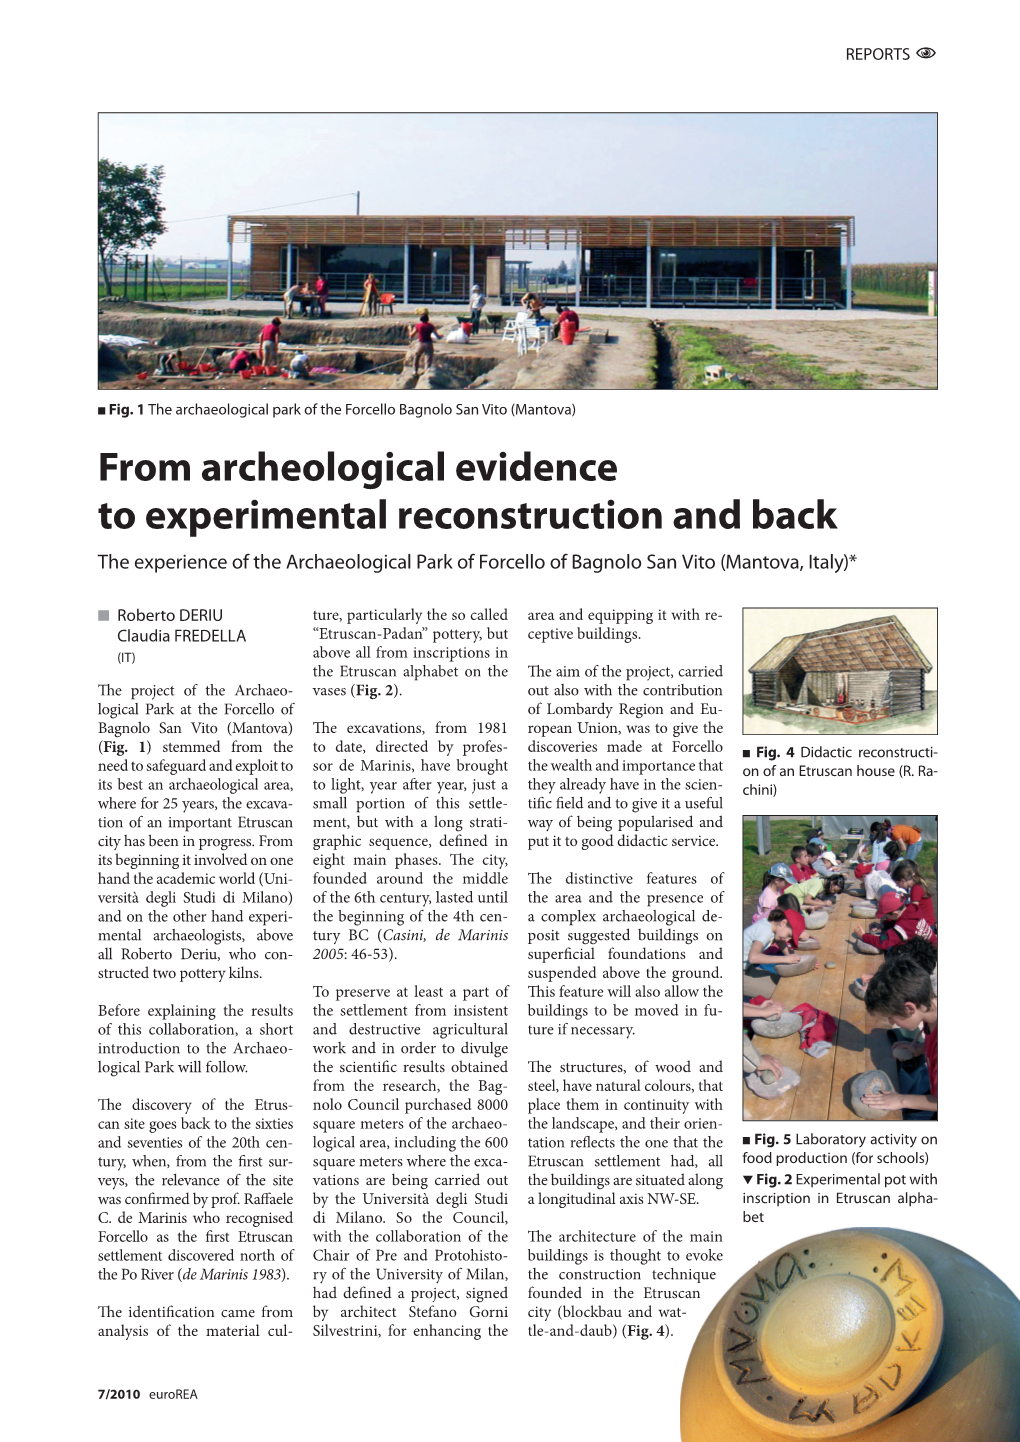 From Archaeological Evidence to Experimental